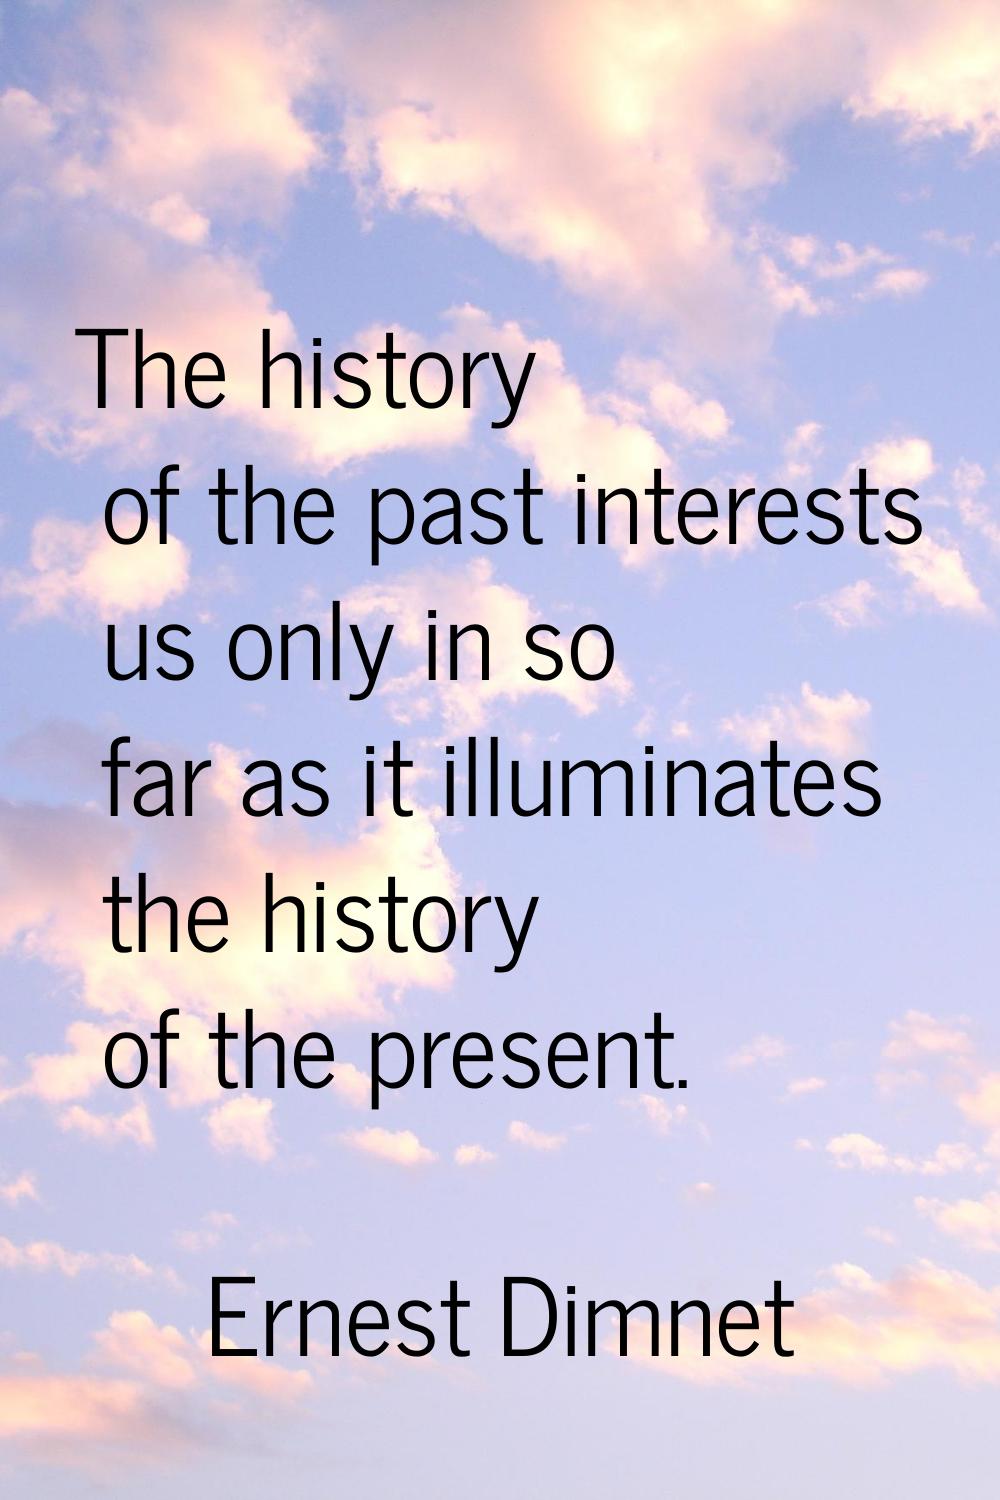 The history of the past interests us only in so far as it illuminates the history of the present.